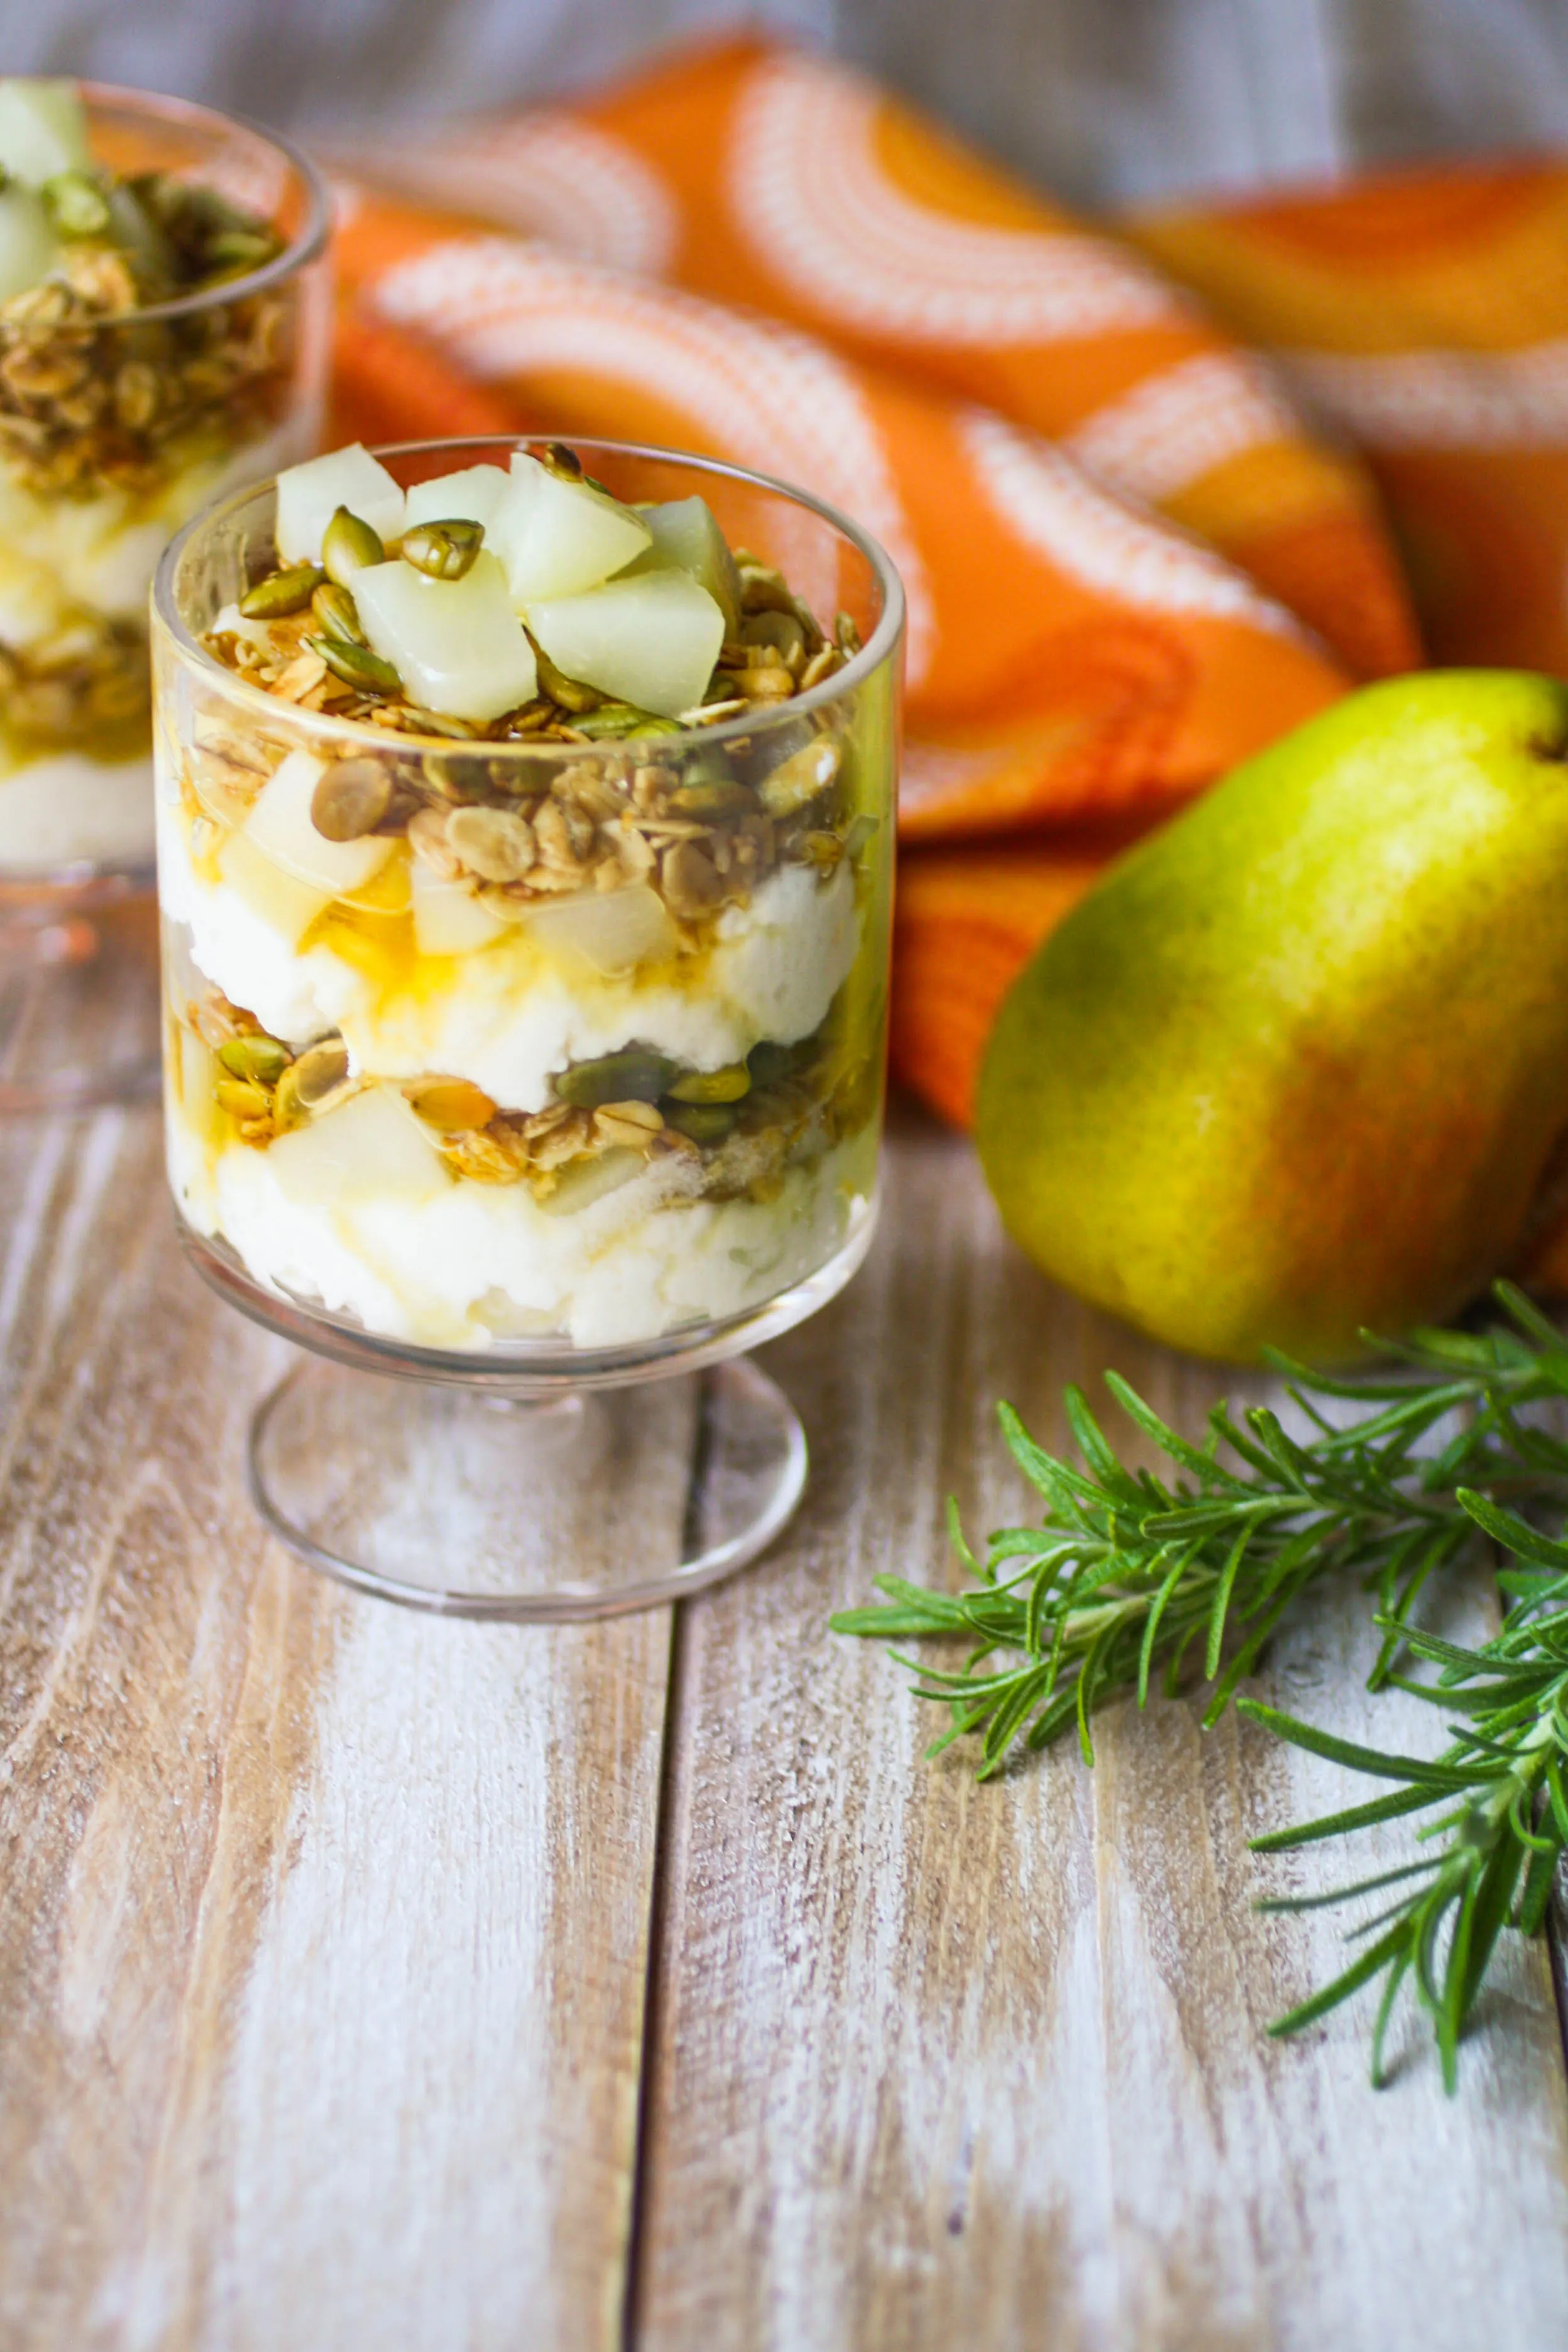 Pear and Ricotta Parfaits with Rosemary-infused Honey is a simple treat you'll enjoy. These pear parfaits are perfect for dessert, or breakfast!